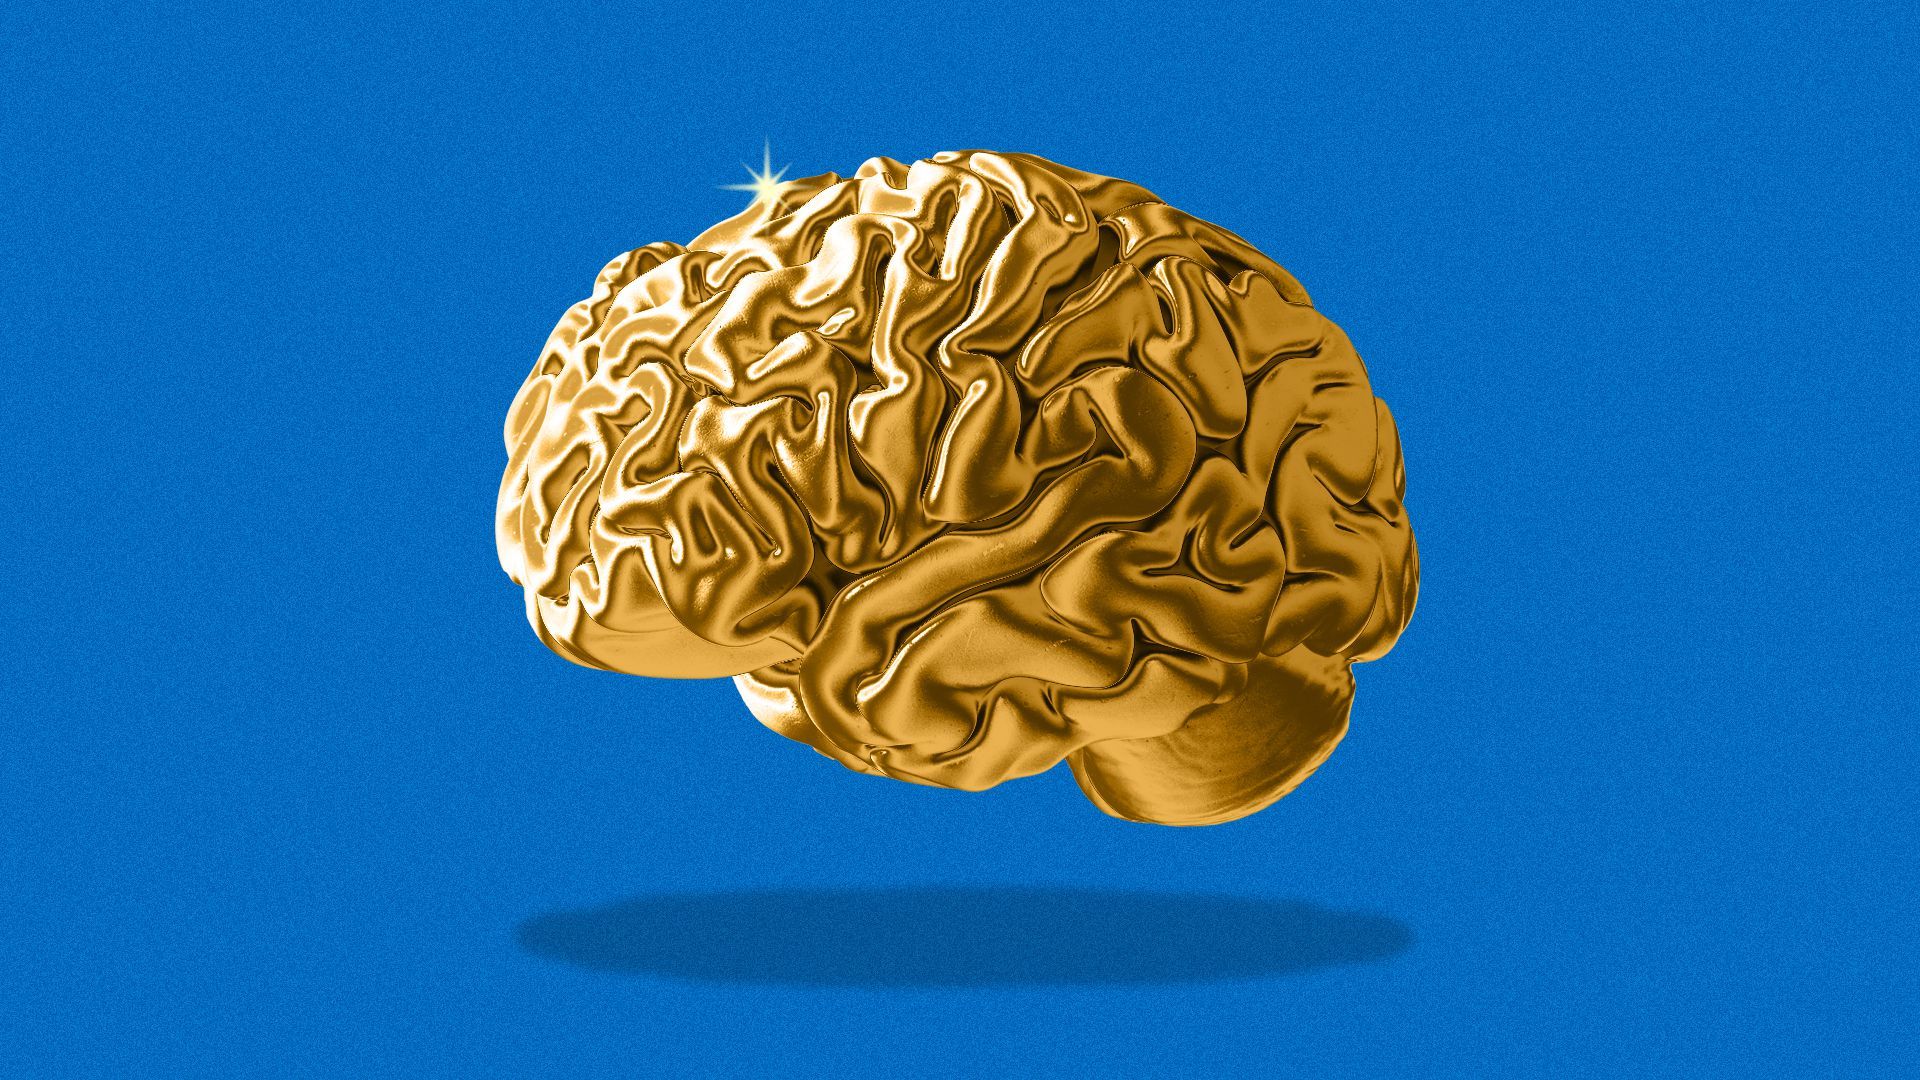 Illustration of a gold-plated brain.